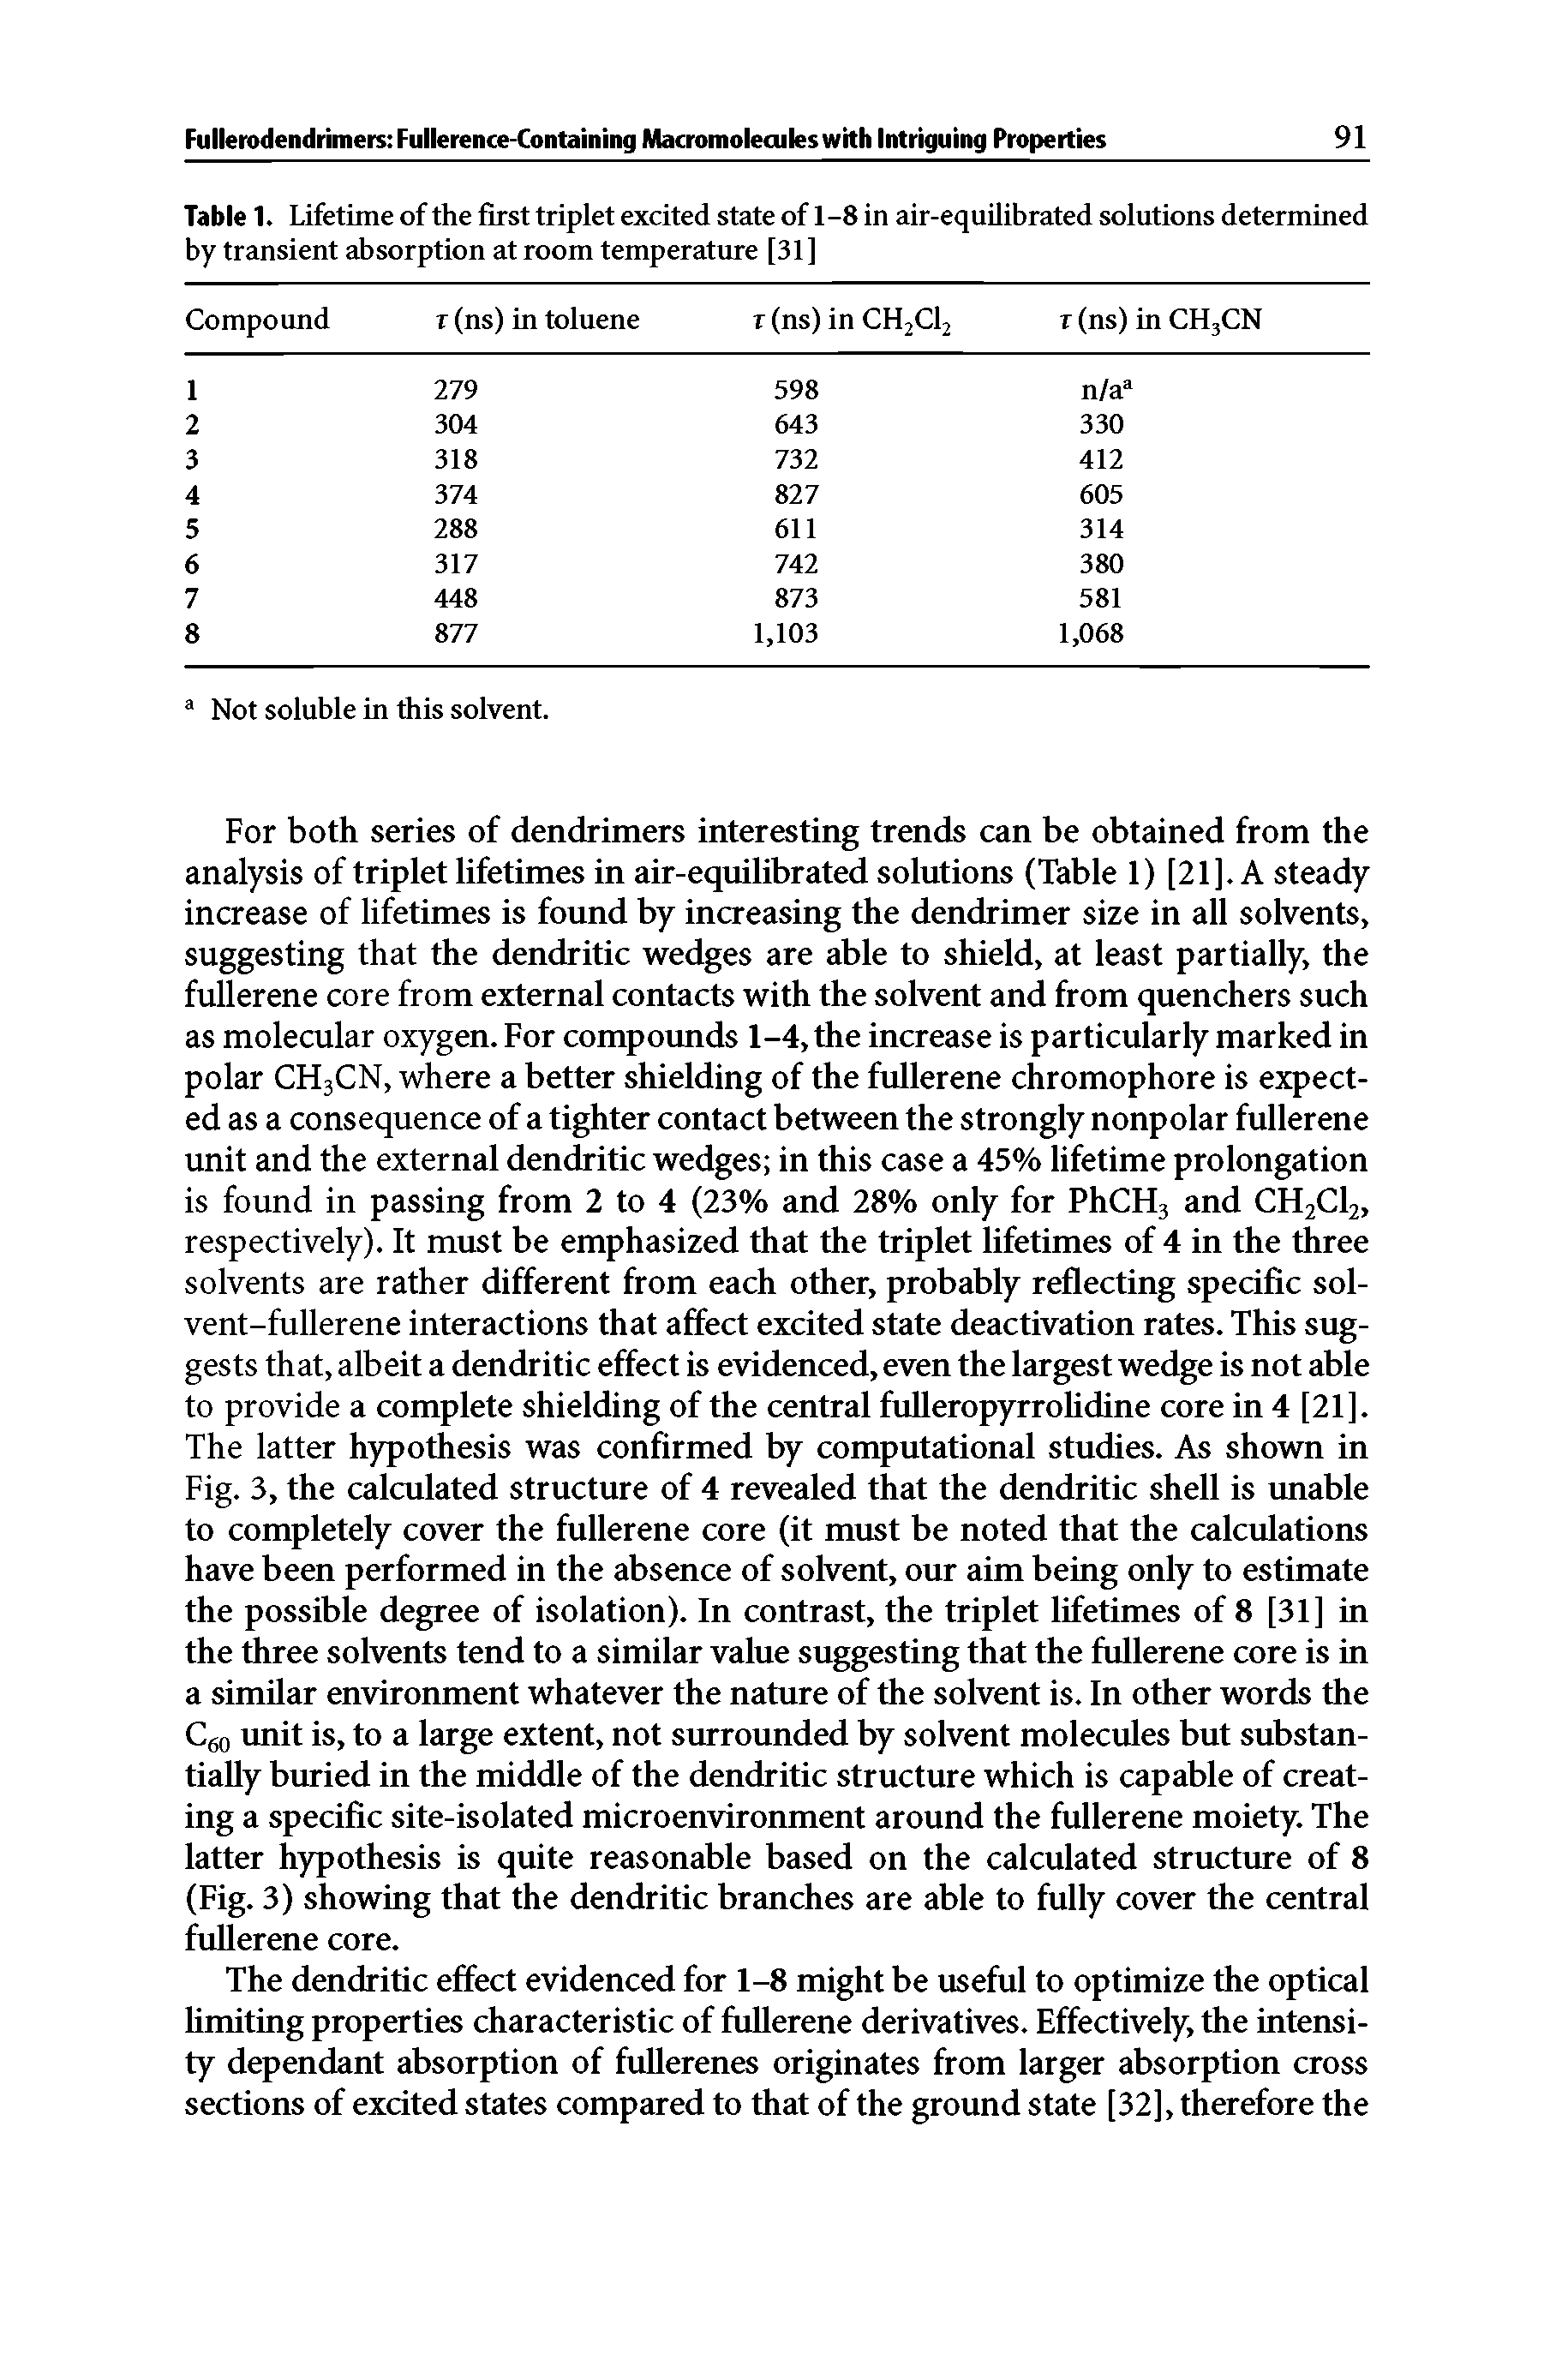 Table 1. Lifetime of the first triplet excited state of 1-8 in air-equilibrated solutions determined by transient absorption at room temperatme [31] ...